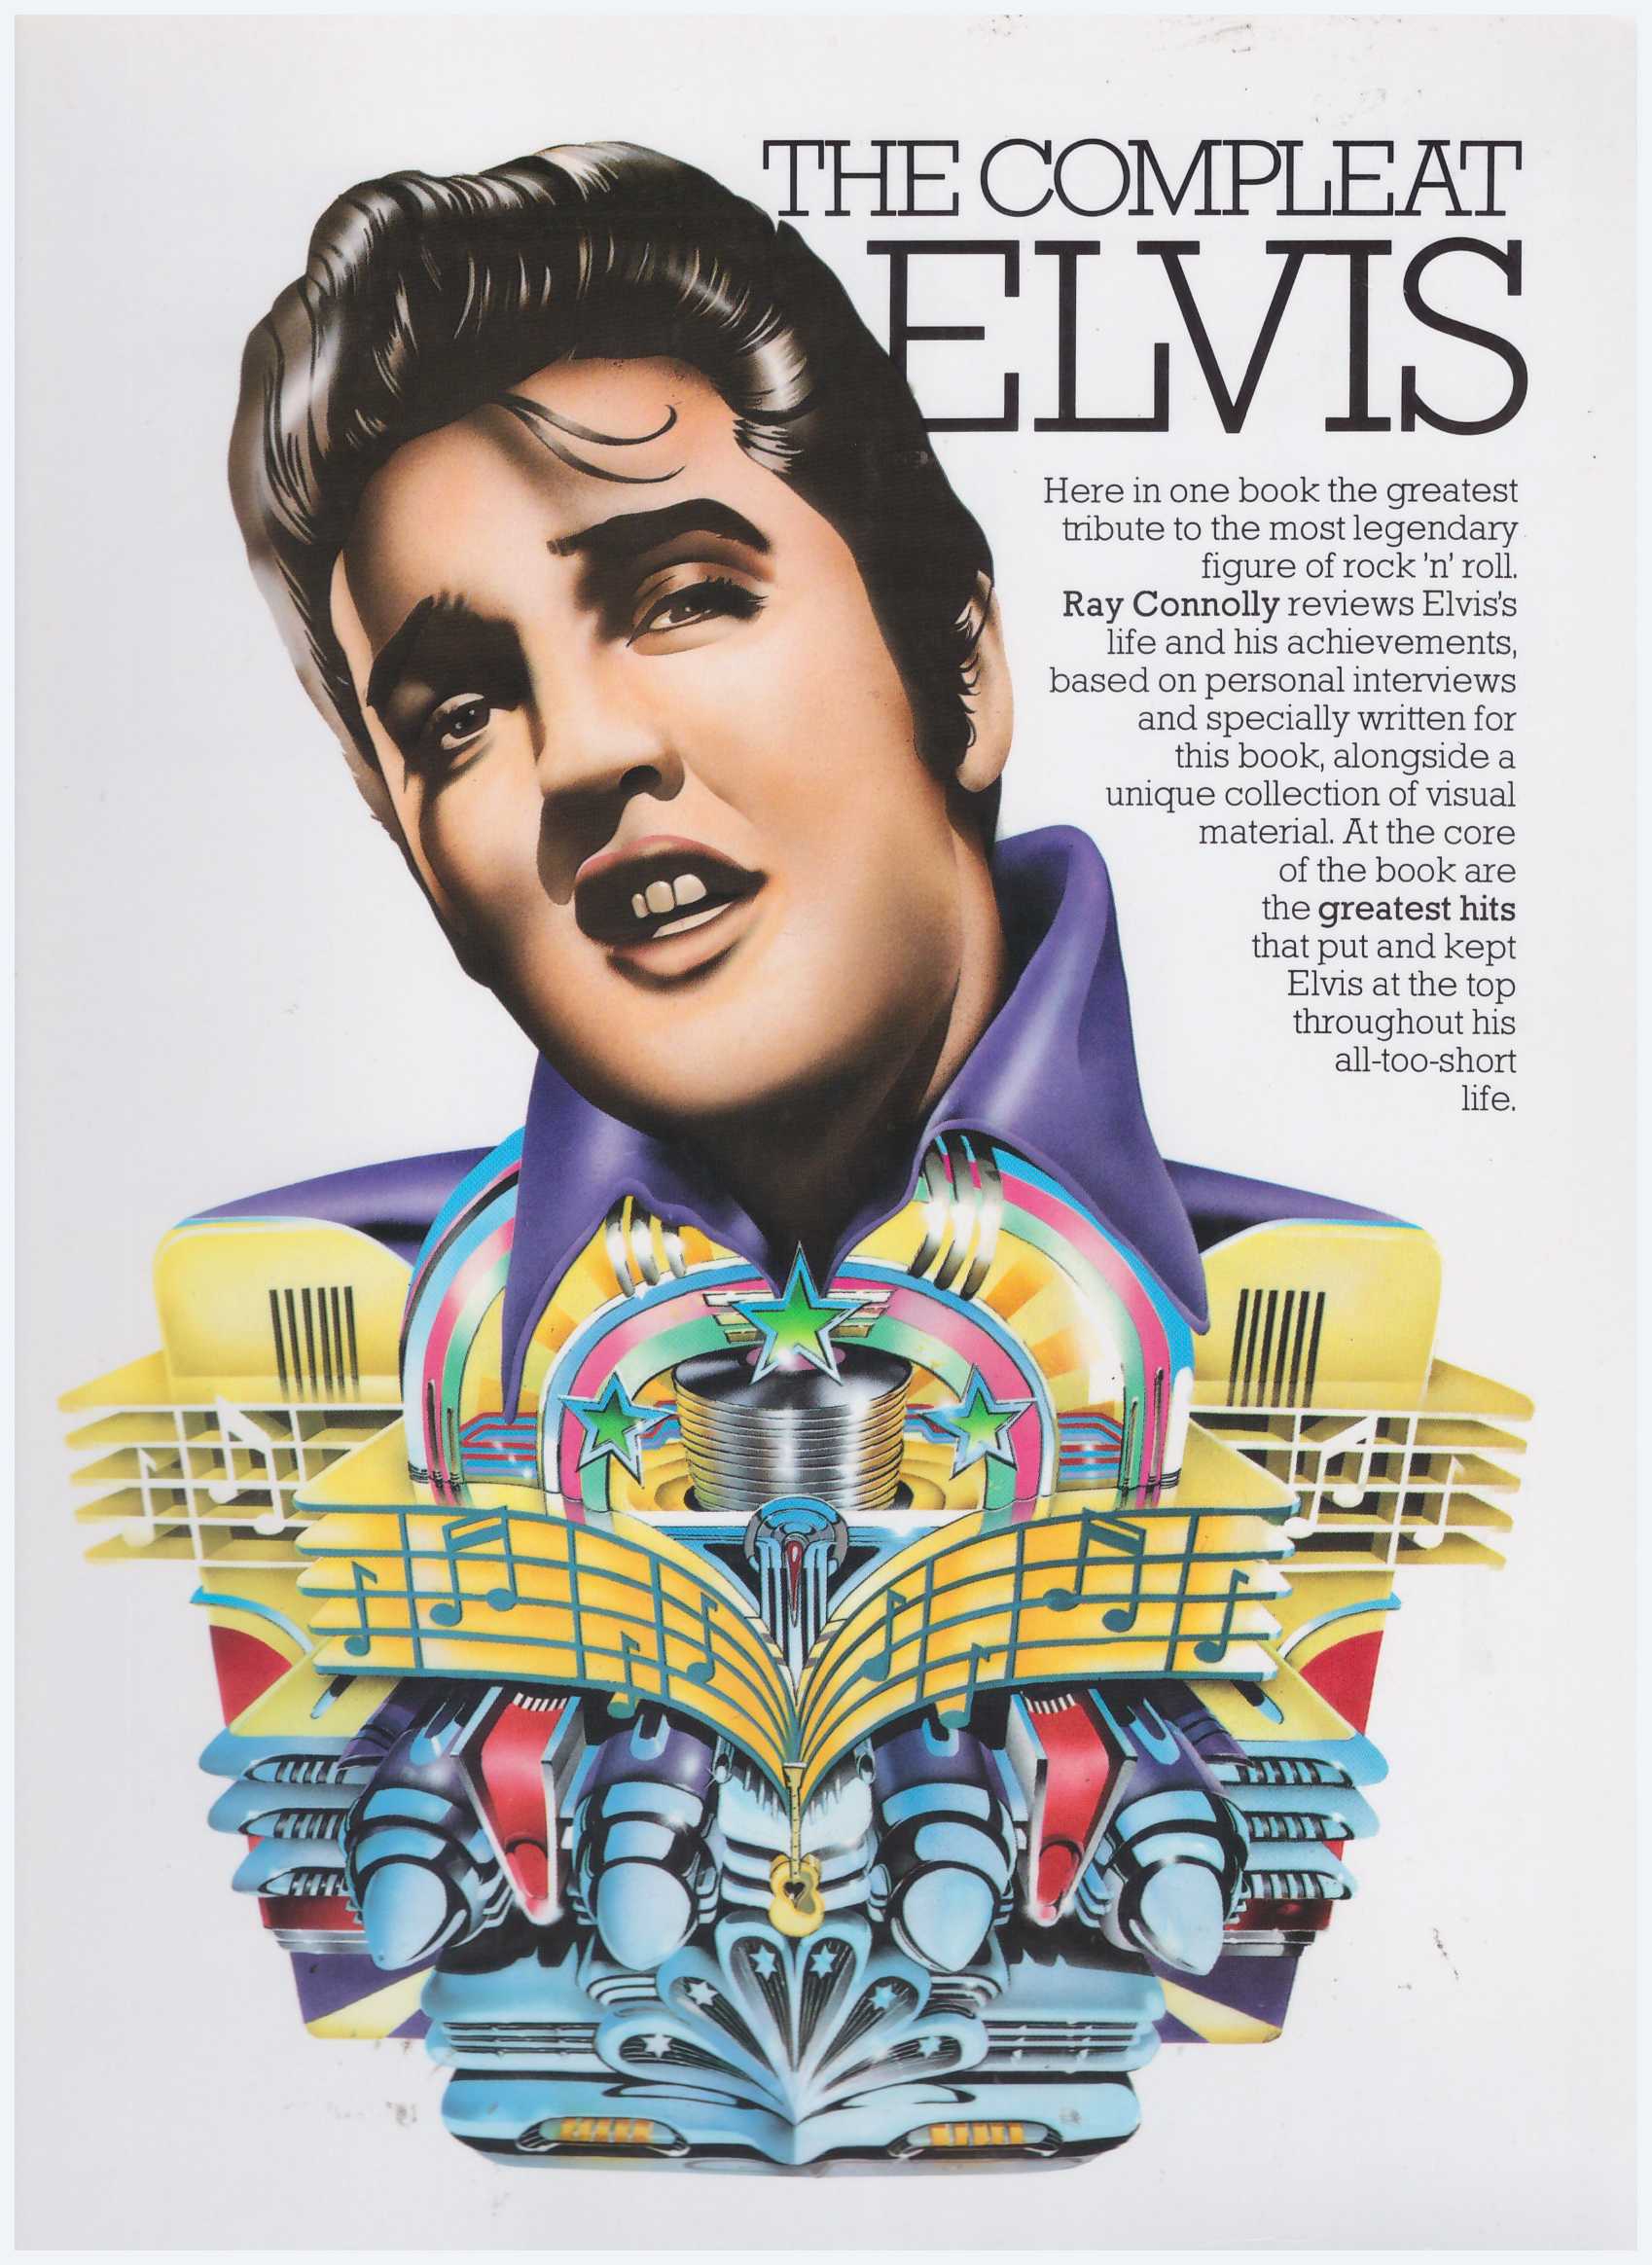 The Compleat Elvis / PVG Book / Piano Book / Pop Song Book / Vocal Book / Voice Book / Guitar Book / Gitar Book